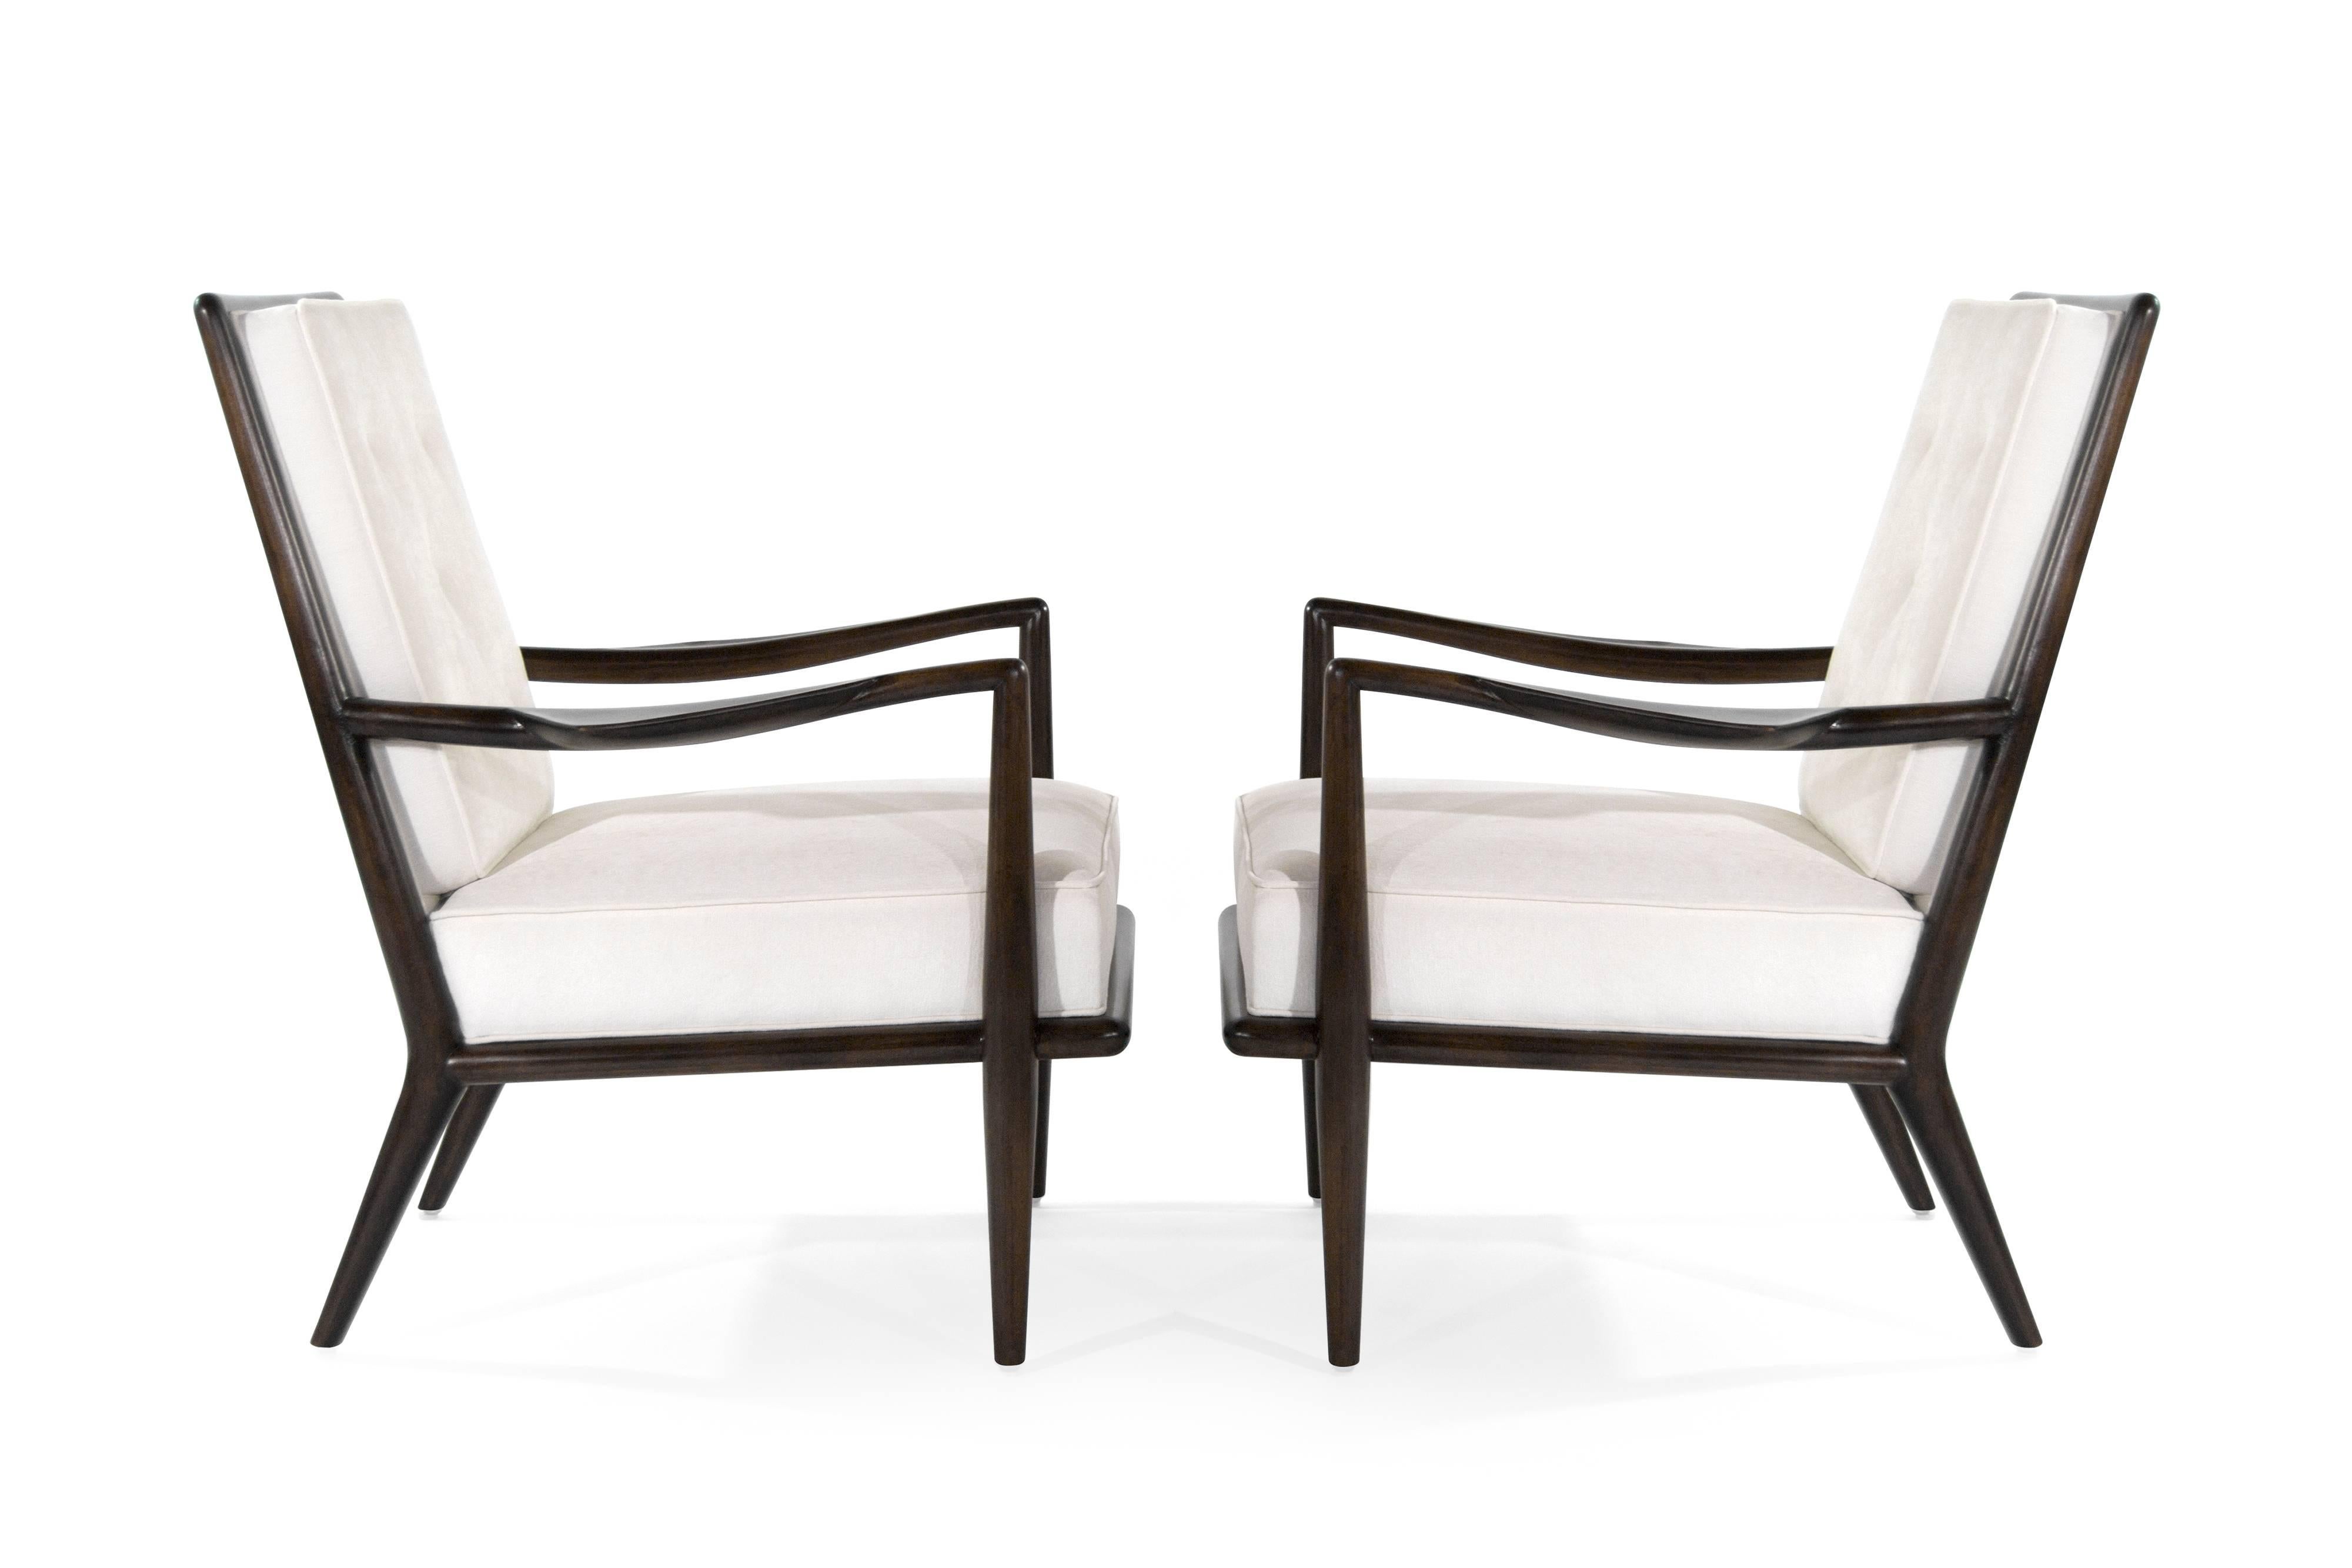 Extremely rare set of lounge chairs designed by T.H. Robsjohn-Gibbings for Widdicomb, circa 1950s.

Walnut frames fully restored, newly upholstered.